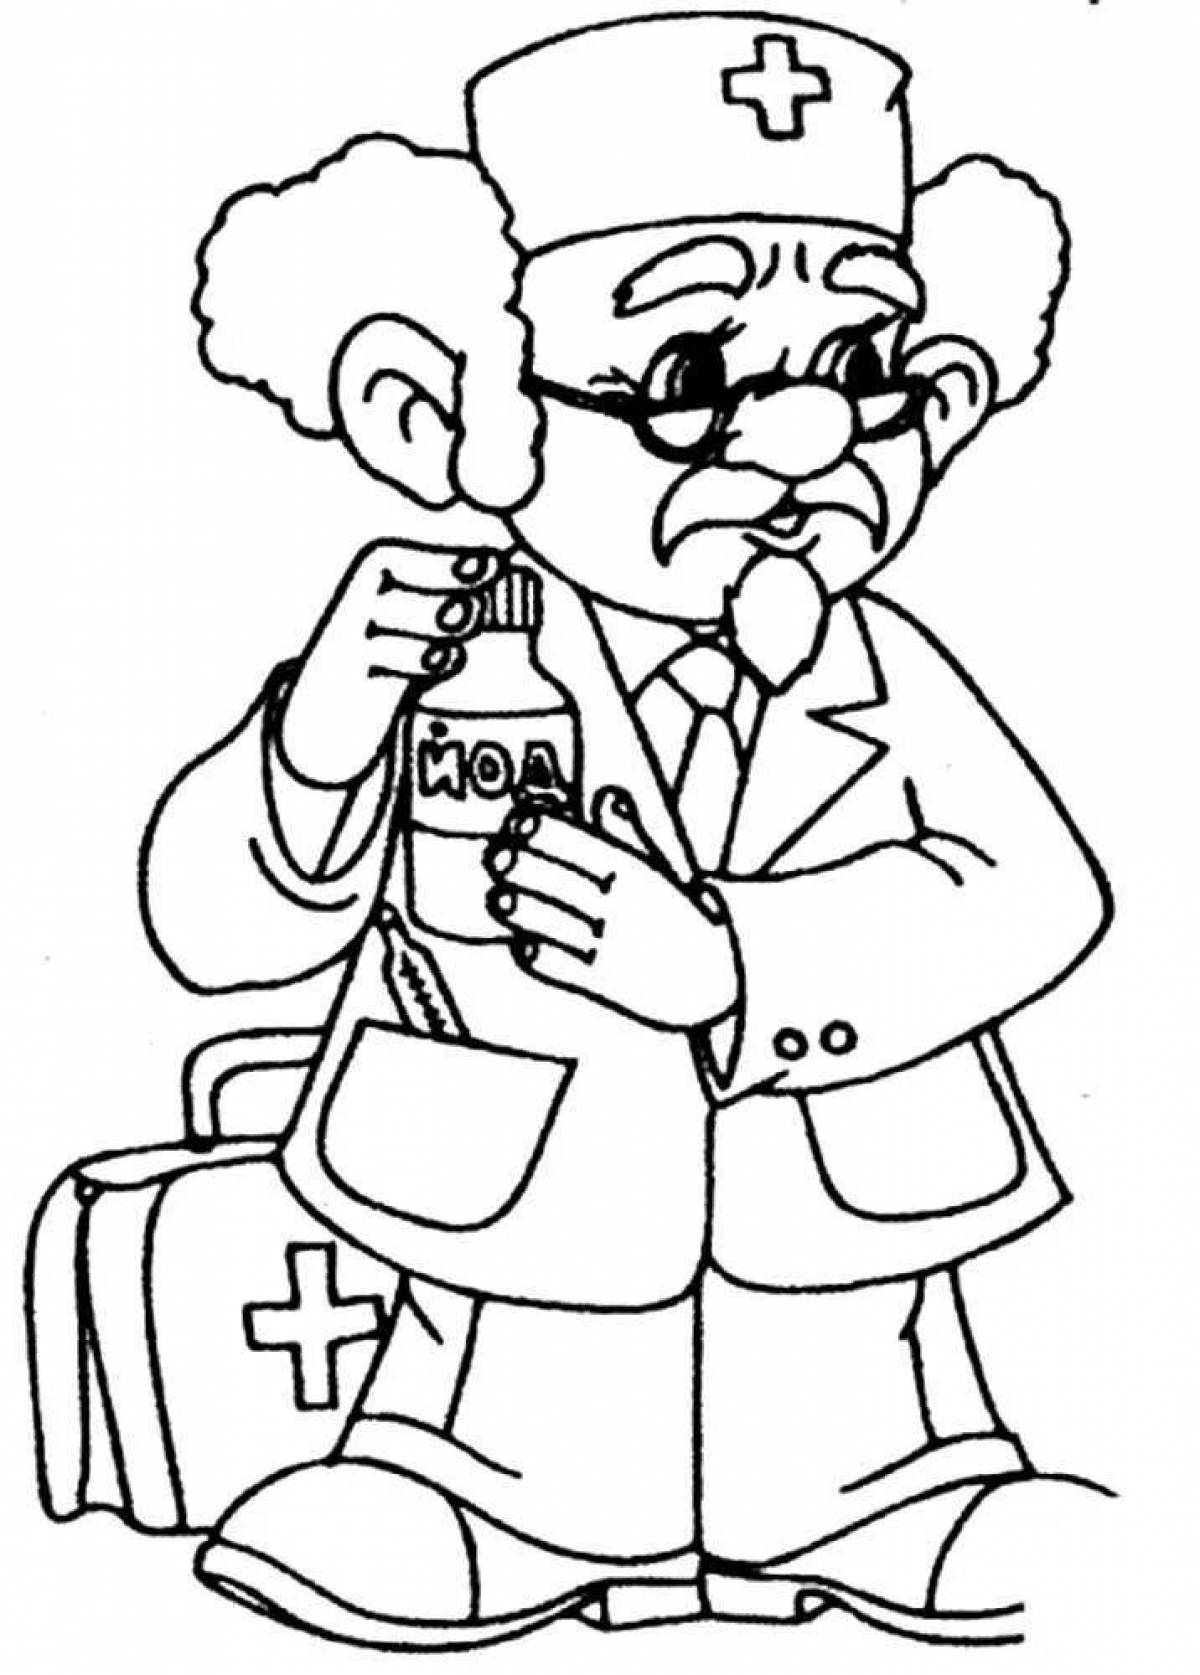 Joyful doctor coloring pages for kids